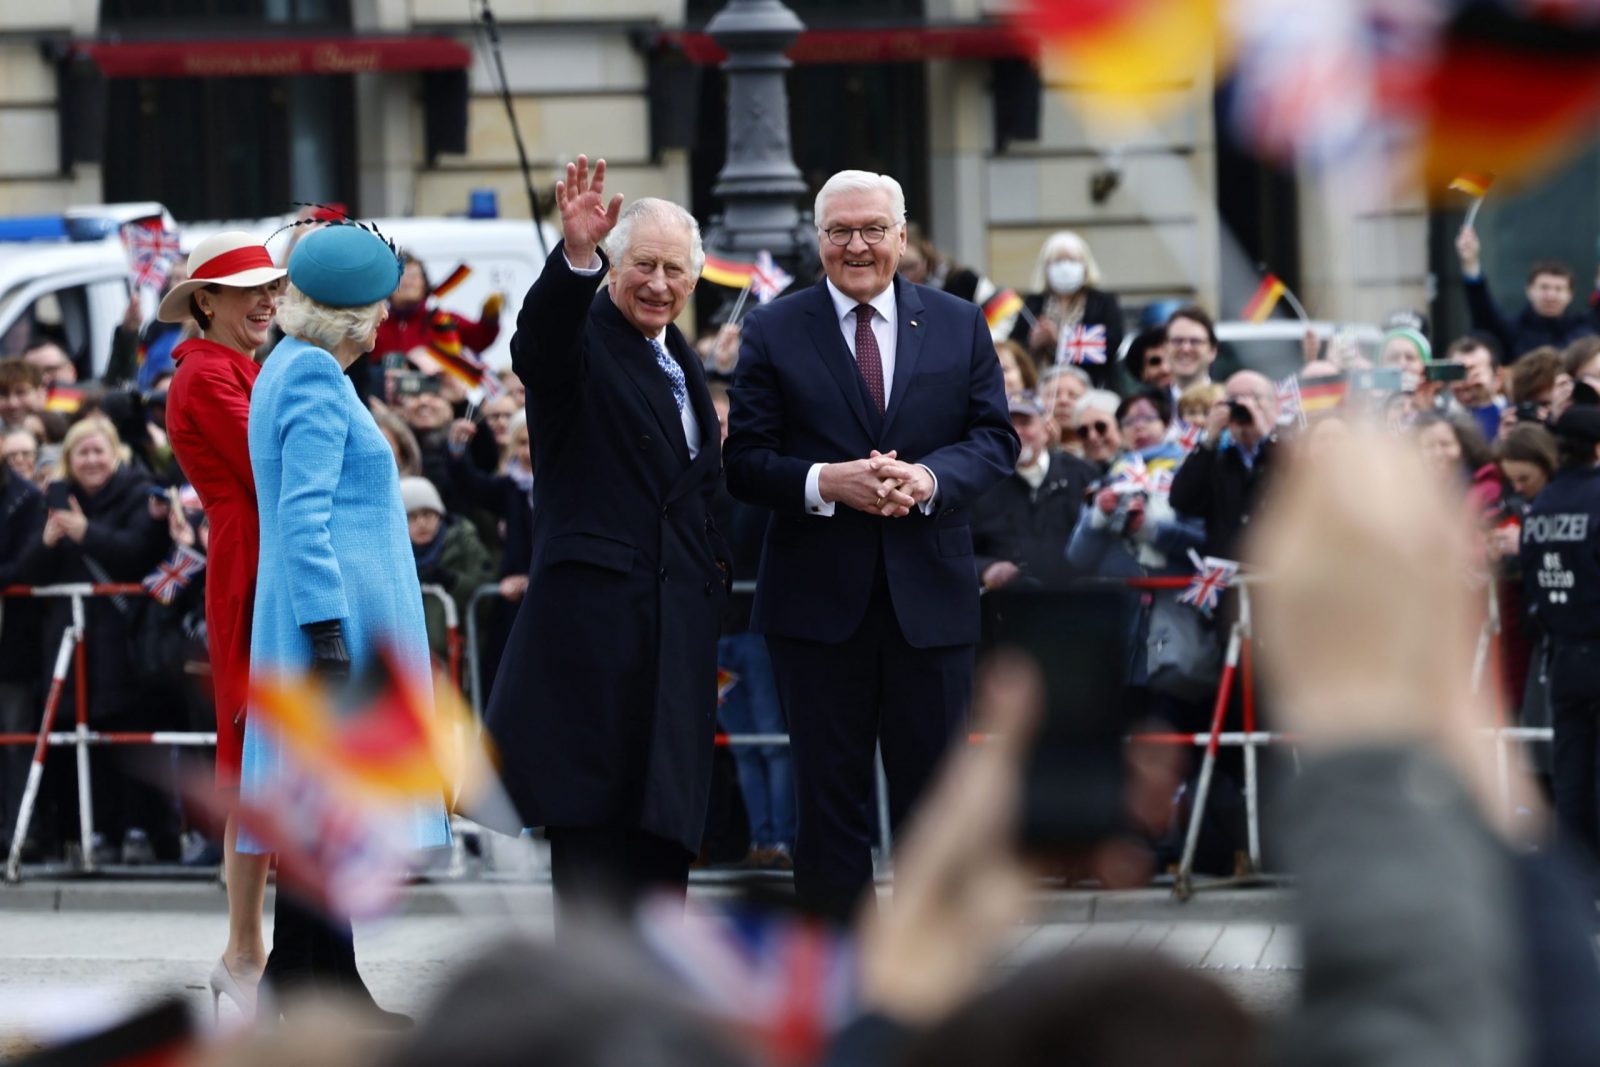 epa10548683 Britain's King Charles III (2L) waves  to the crowd with German President Frank-Walter Steinmeier (L) in Berlin, Germany, 29 March 2023. The King of Britain's first state visit to Germany is taking place from 29 to 31 March.  EPA/HANNIBAL HANSCHKE